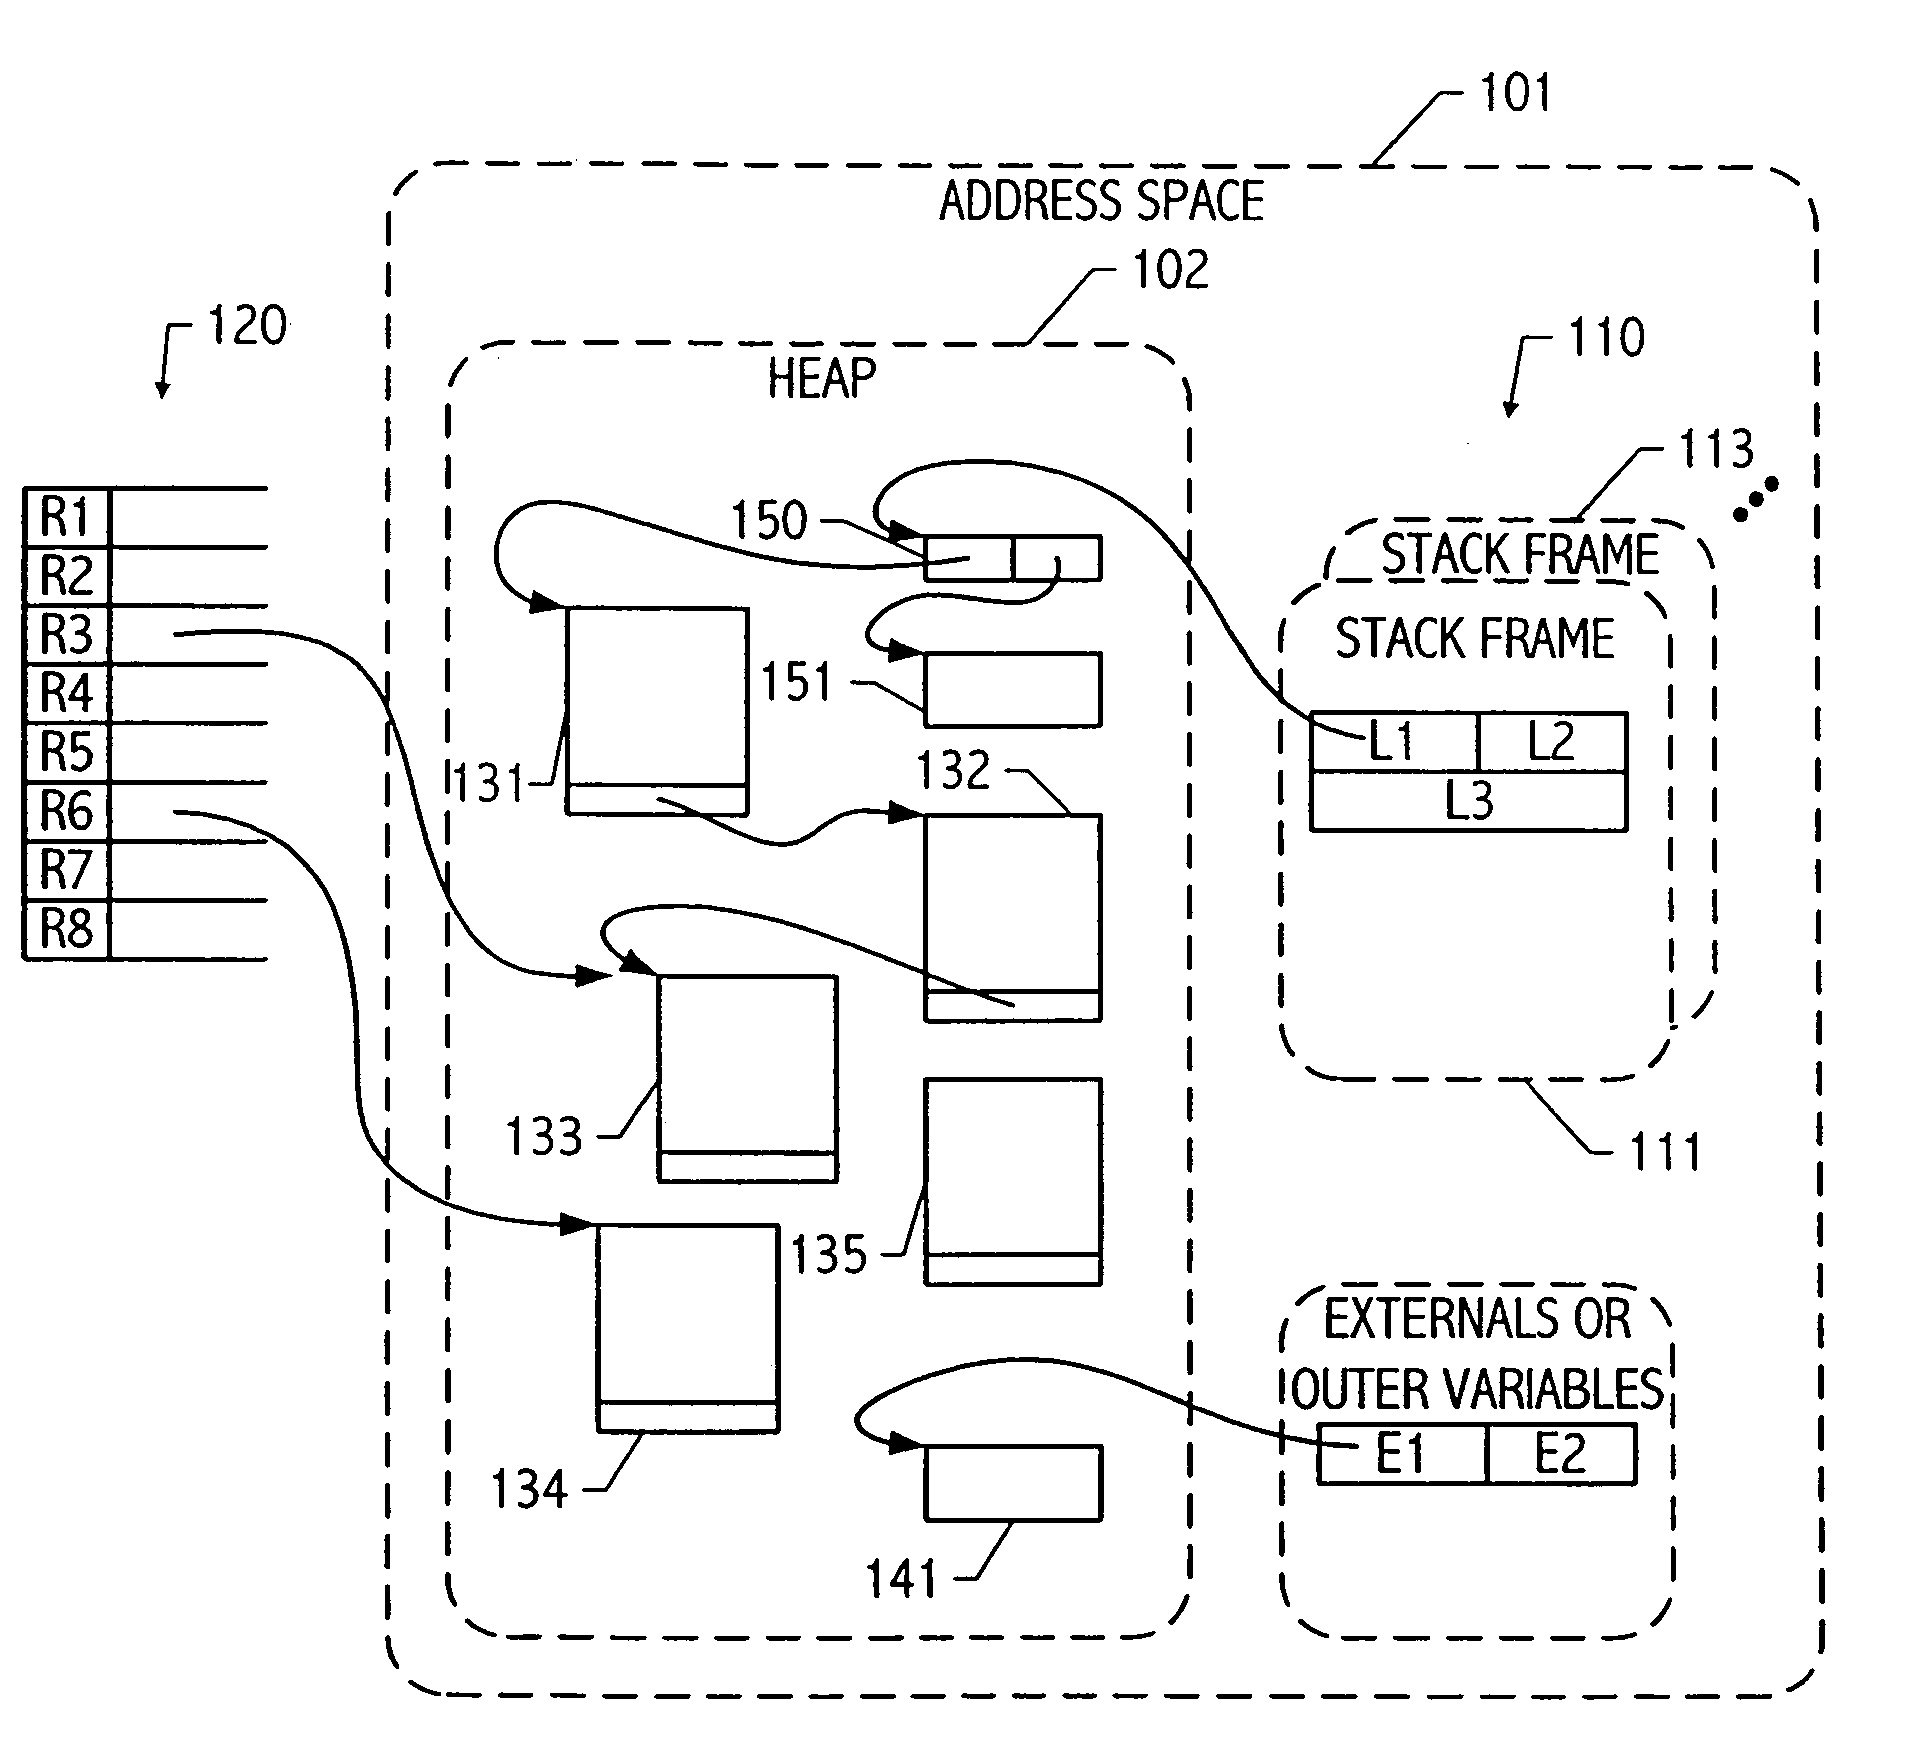 Cooperative preemption mechanism for garbage-collected multi-threaded computation